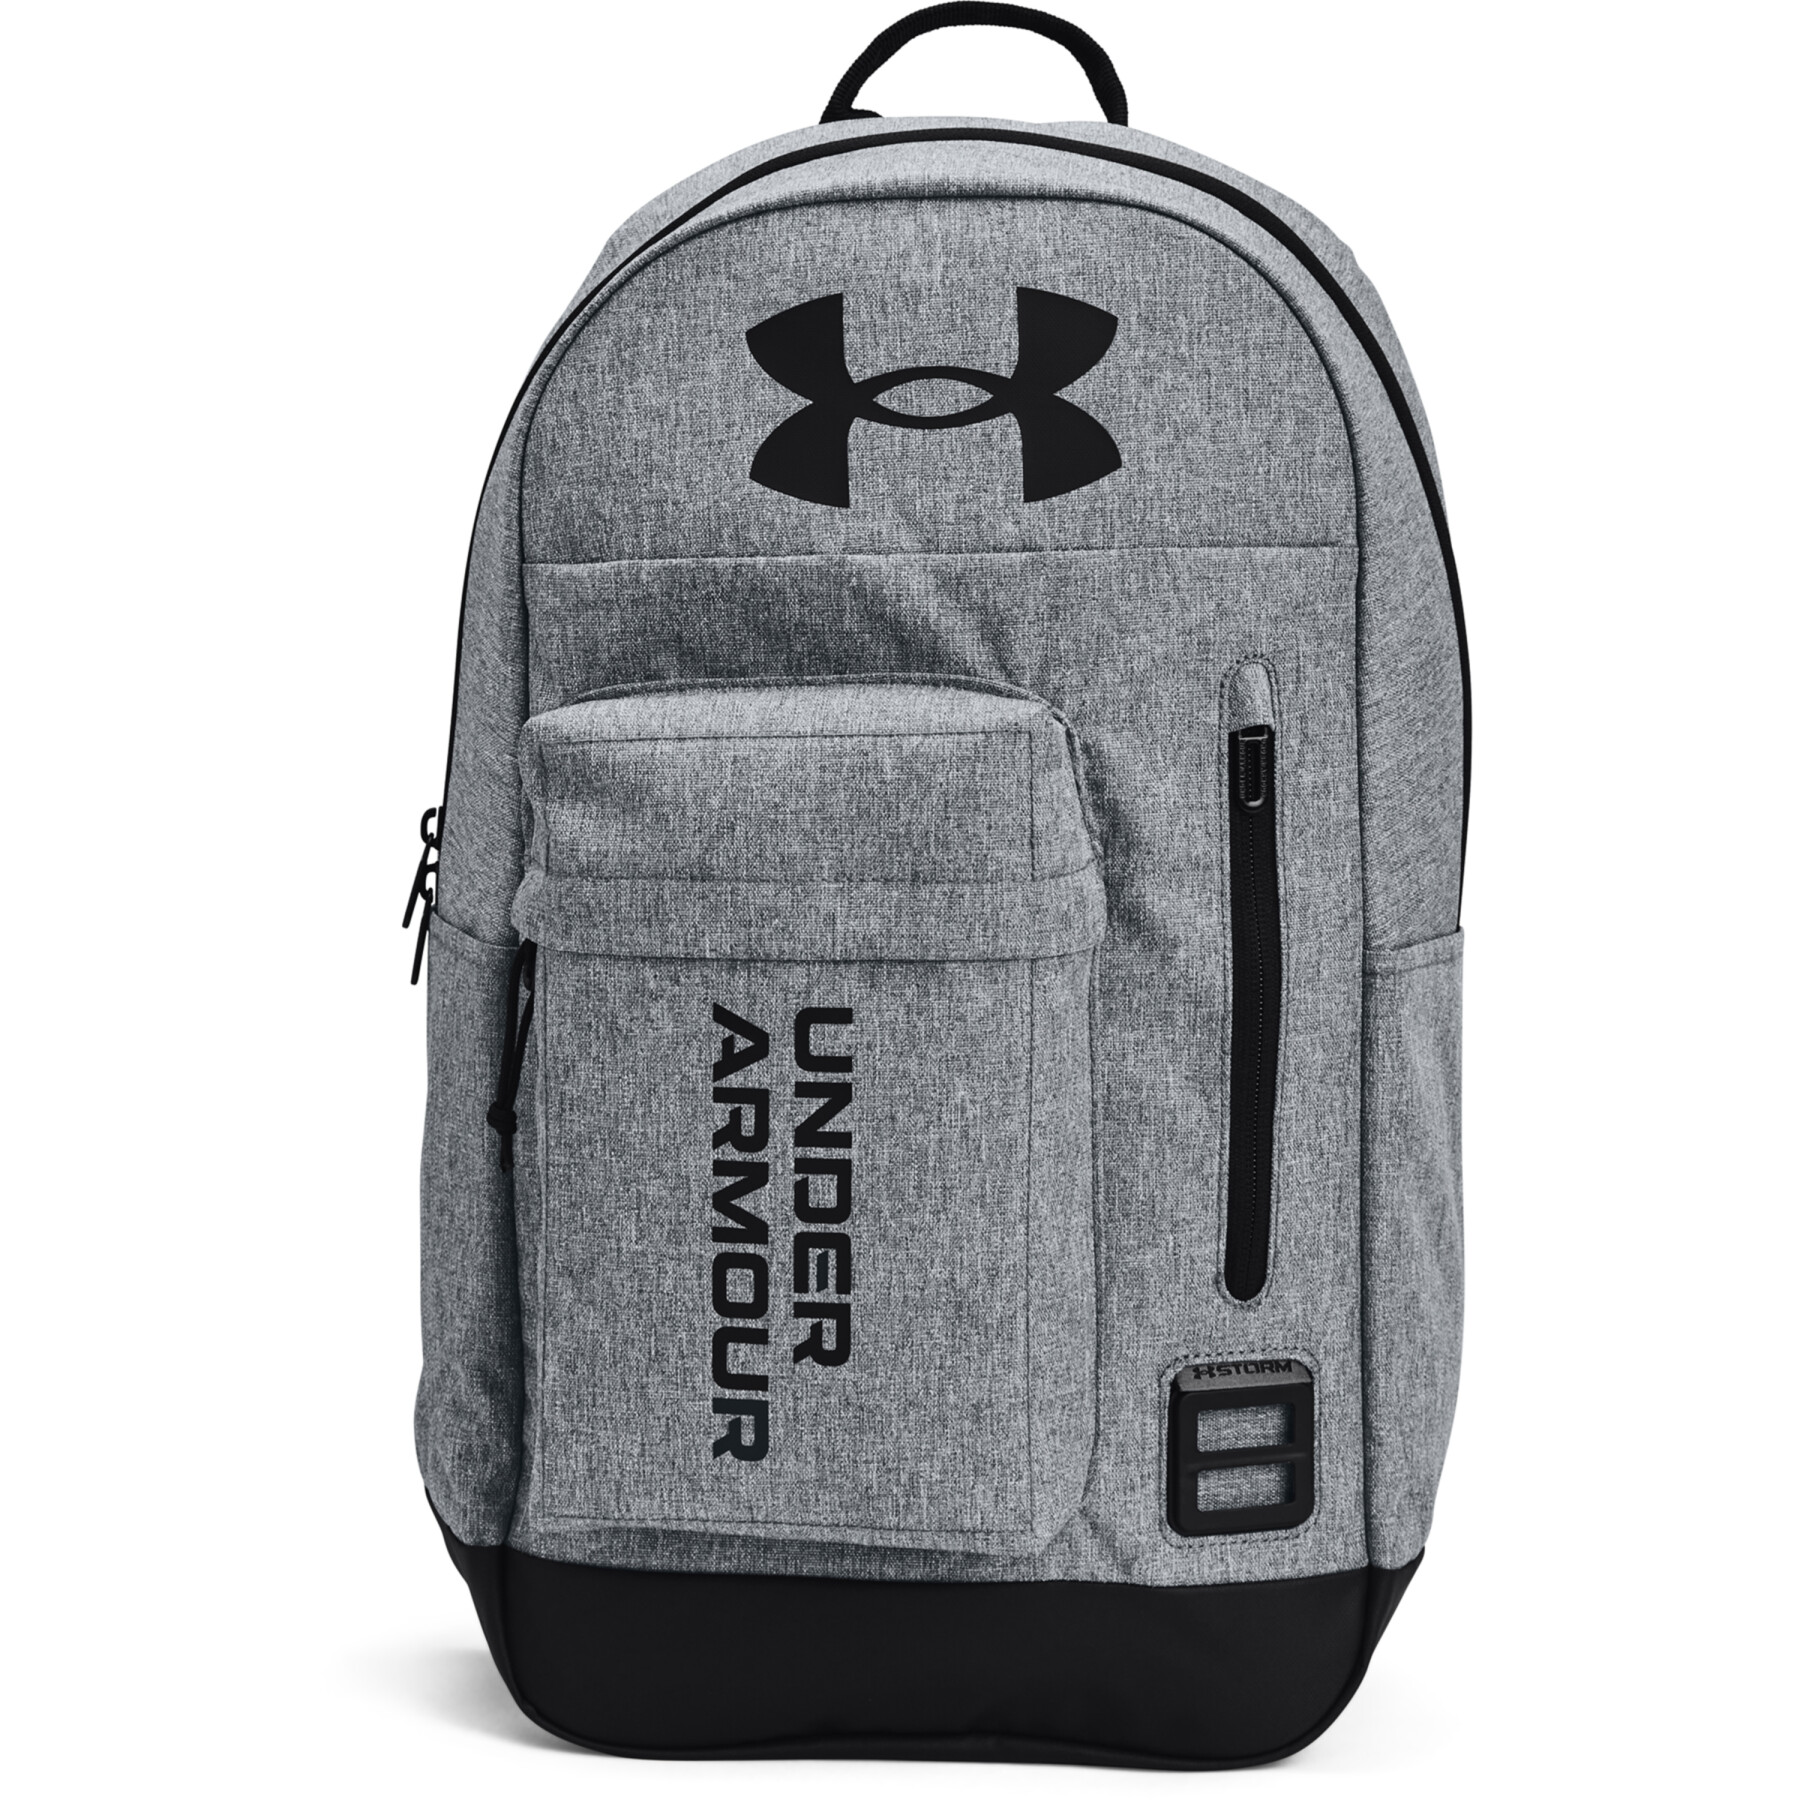 Backpack Under Armour Halftime